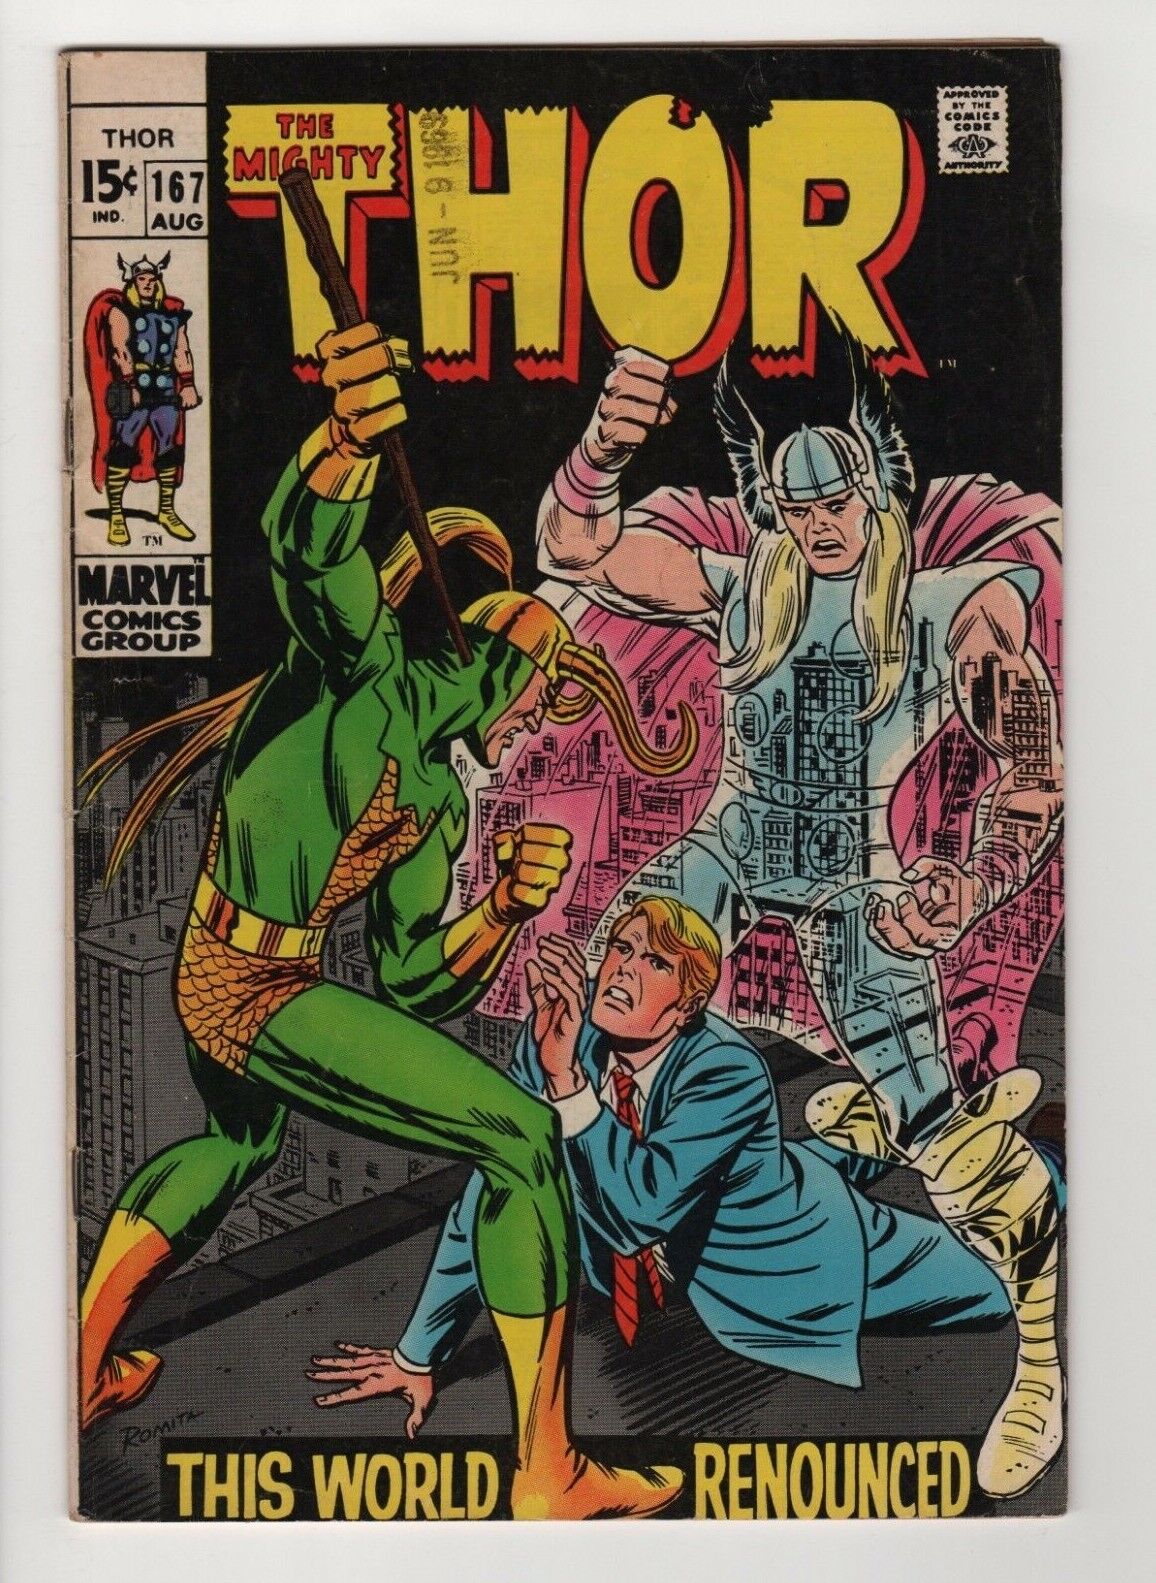 The Mighty Thor # 167 (Aug 1969, Marvel)  This World Renounced